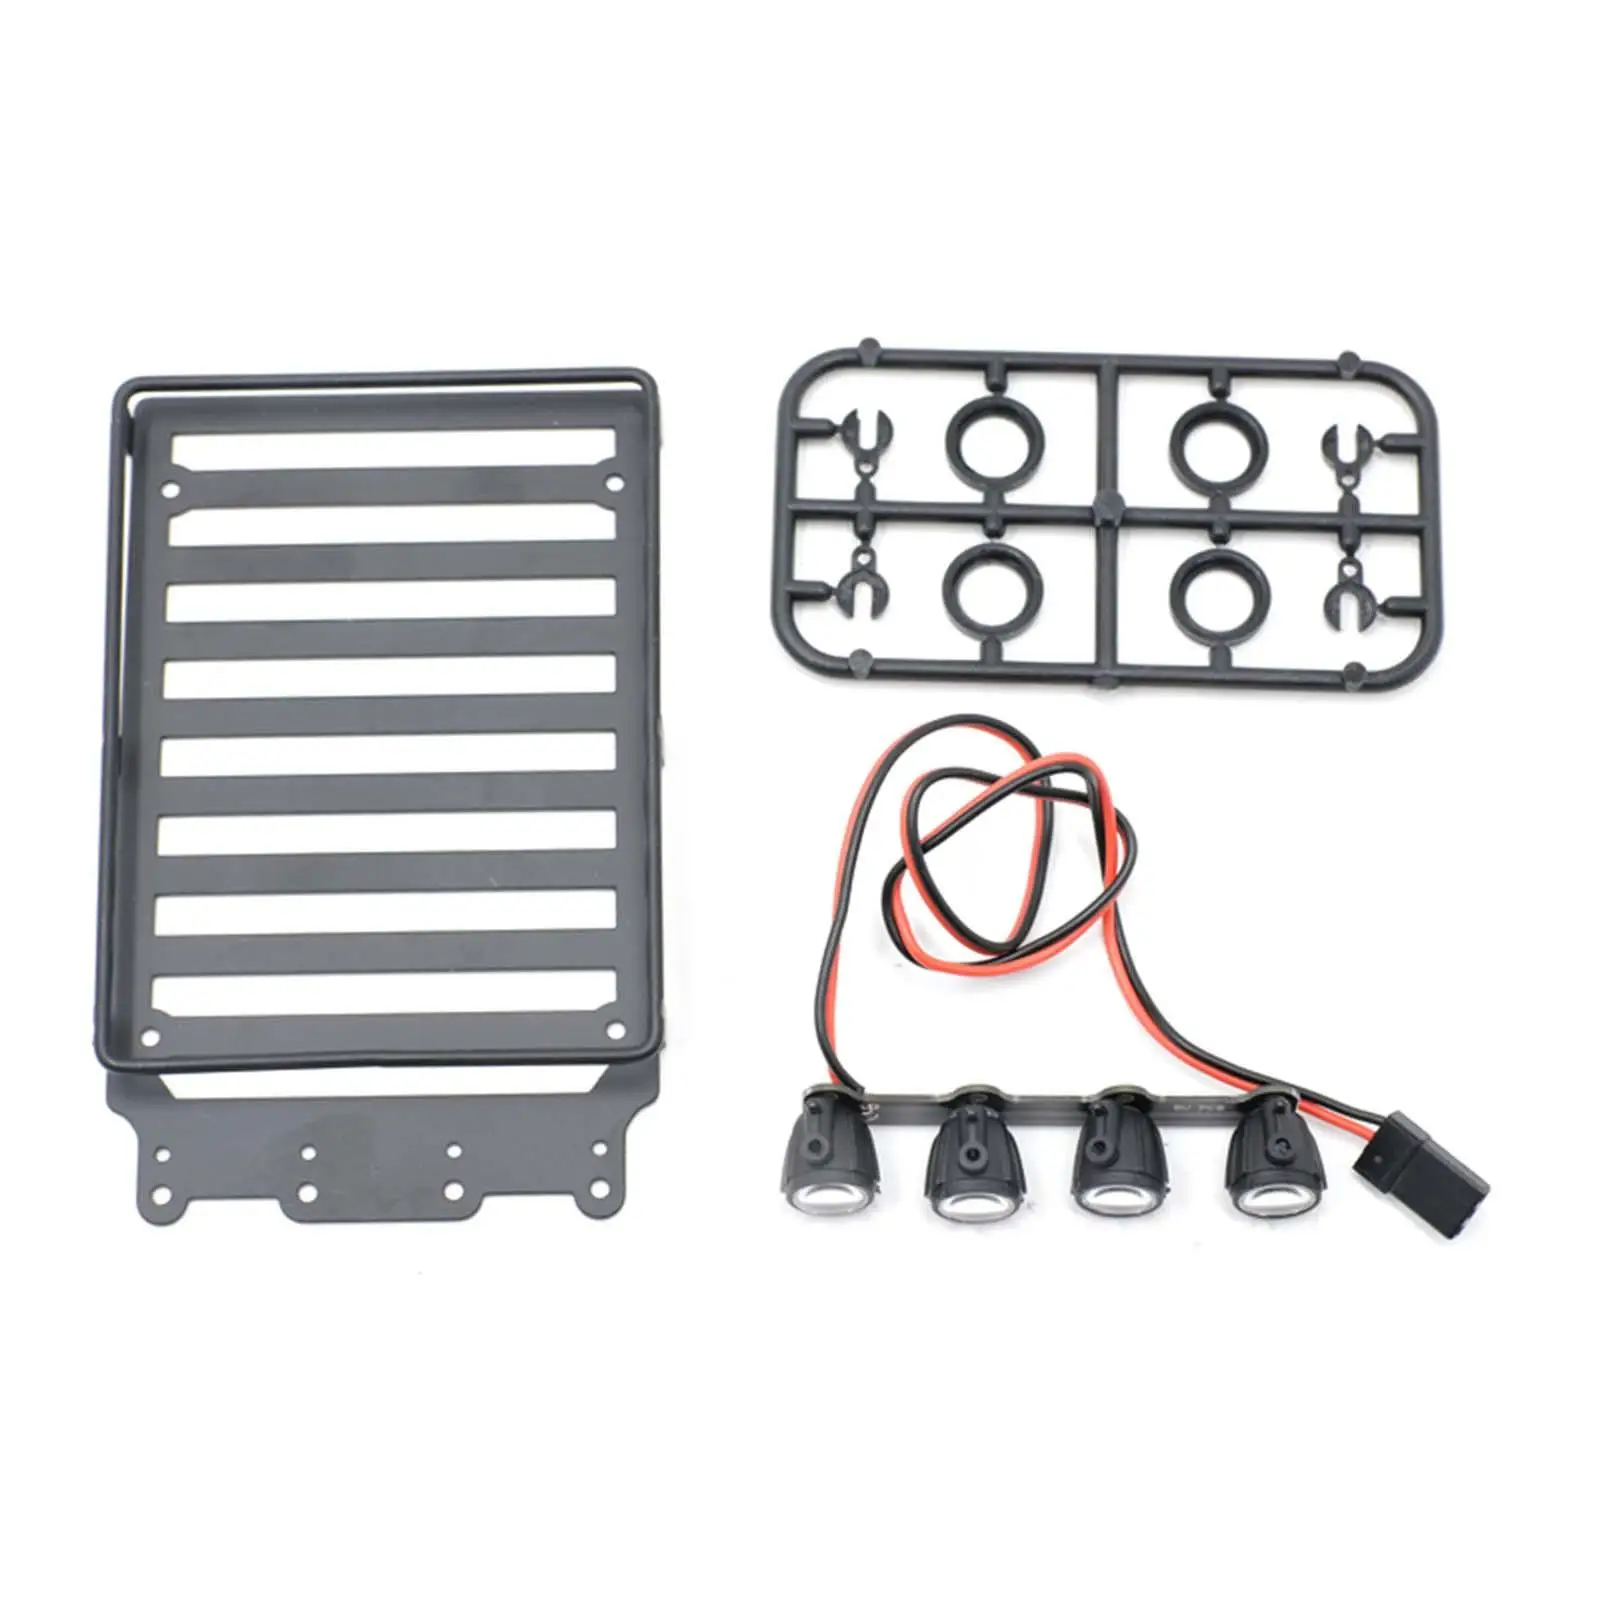 Metal RC Roof Rack for Axial SCX24 1/24 Scale RC Crawler Car DIY Modified Replaces